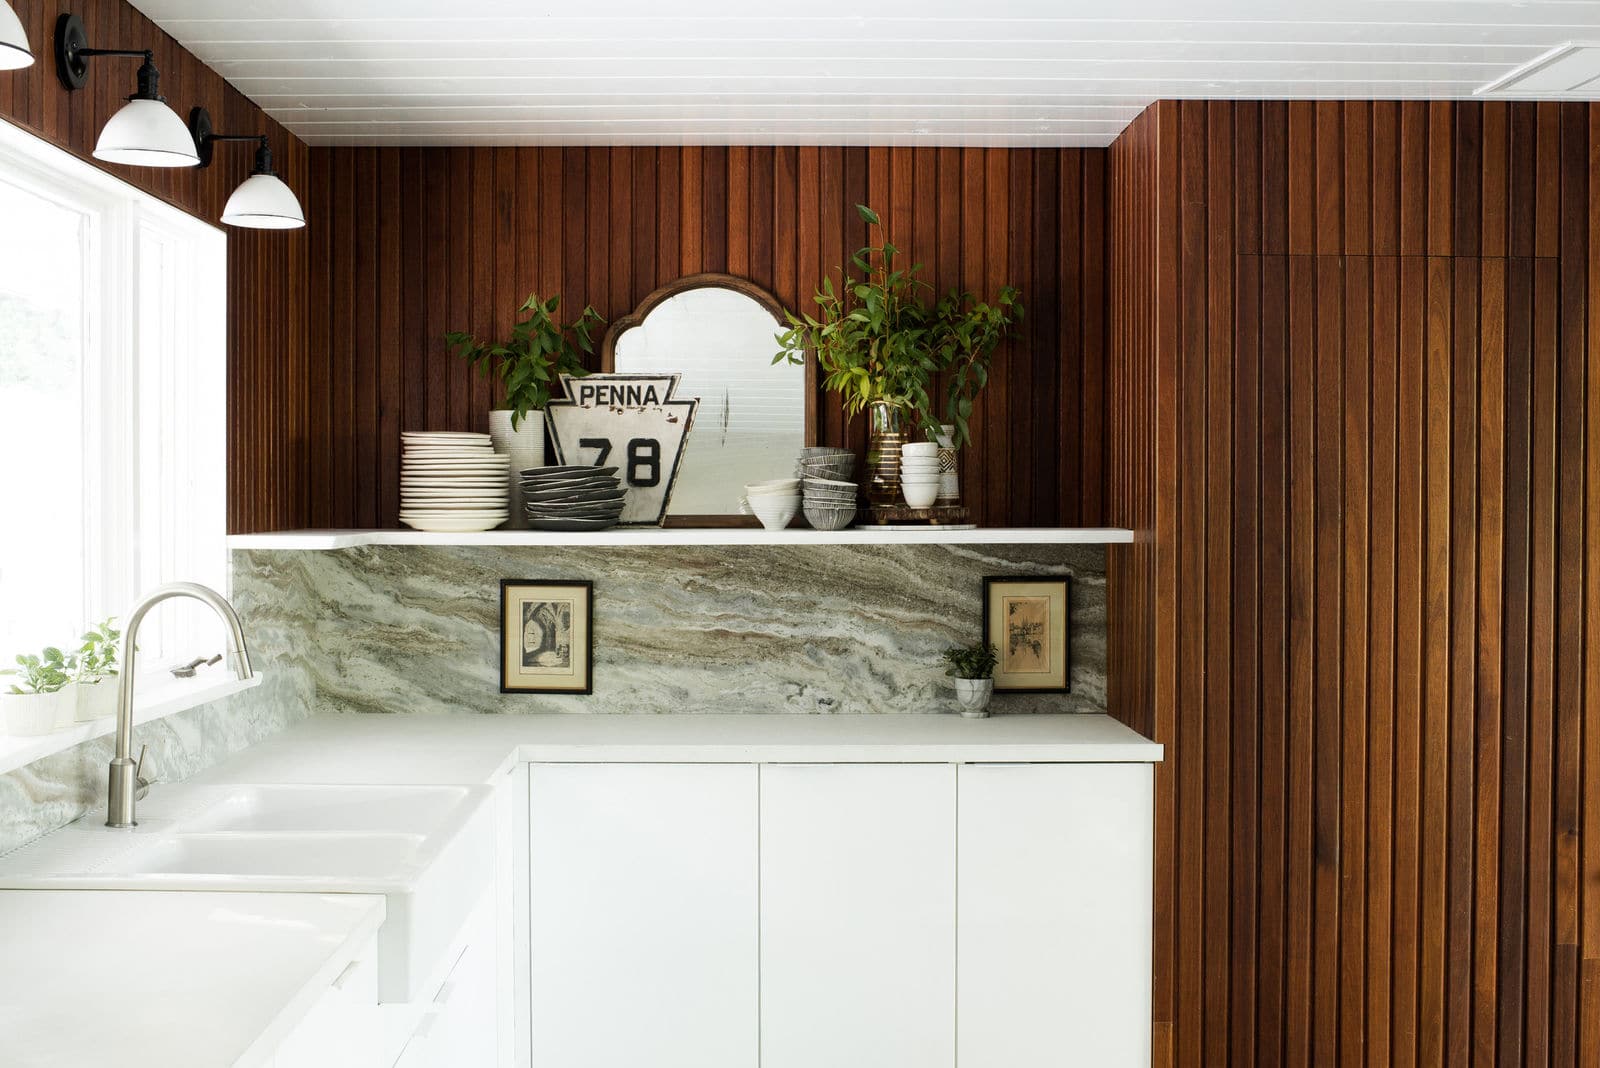 luxe marble backsplash in this updated mid-century style kitchen | house tour on coco kelley